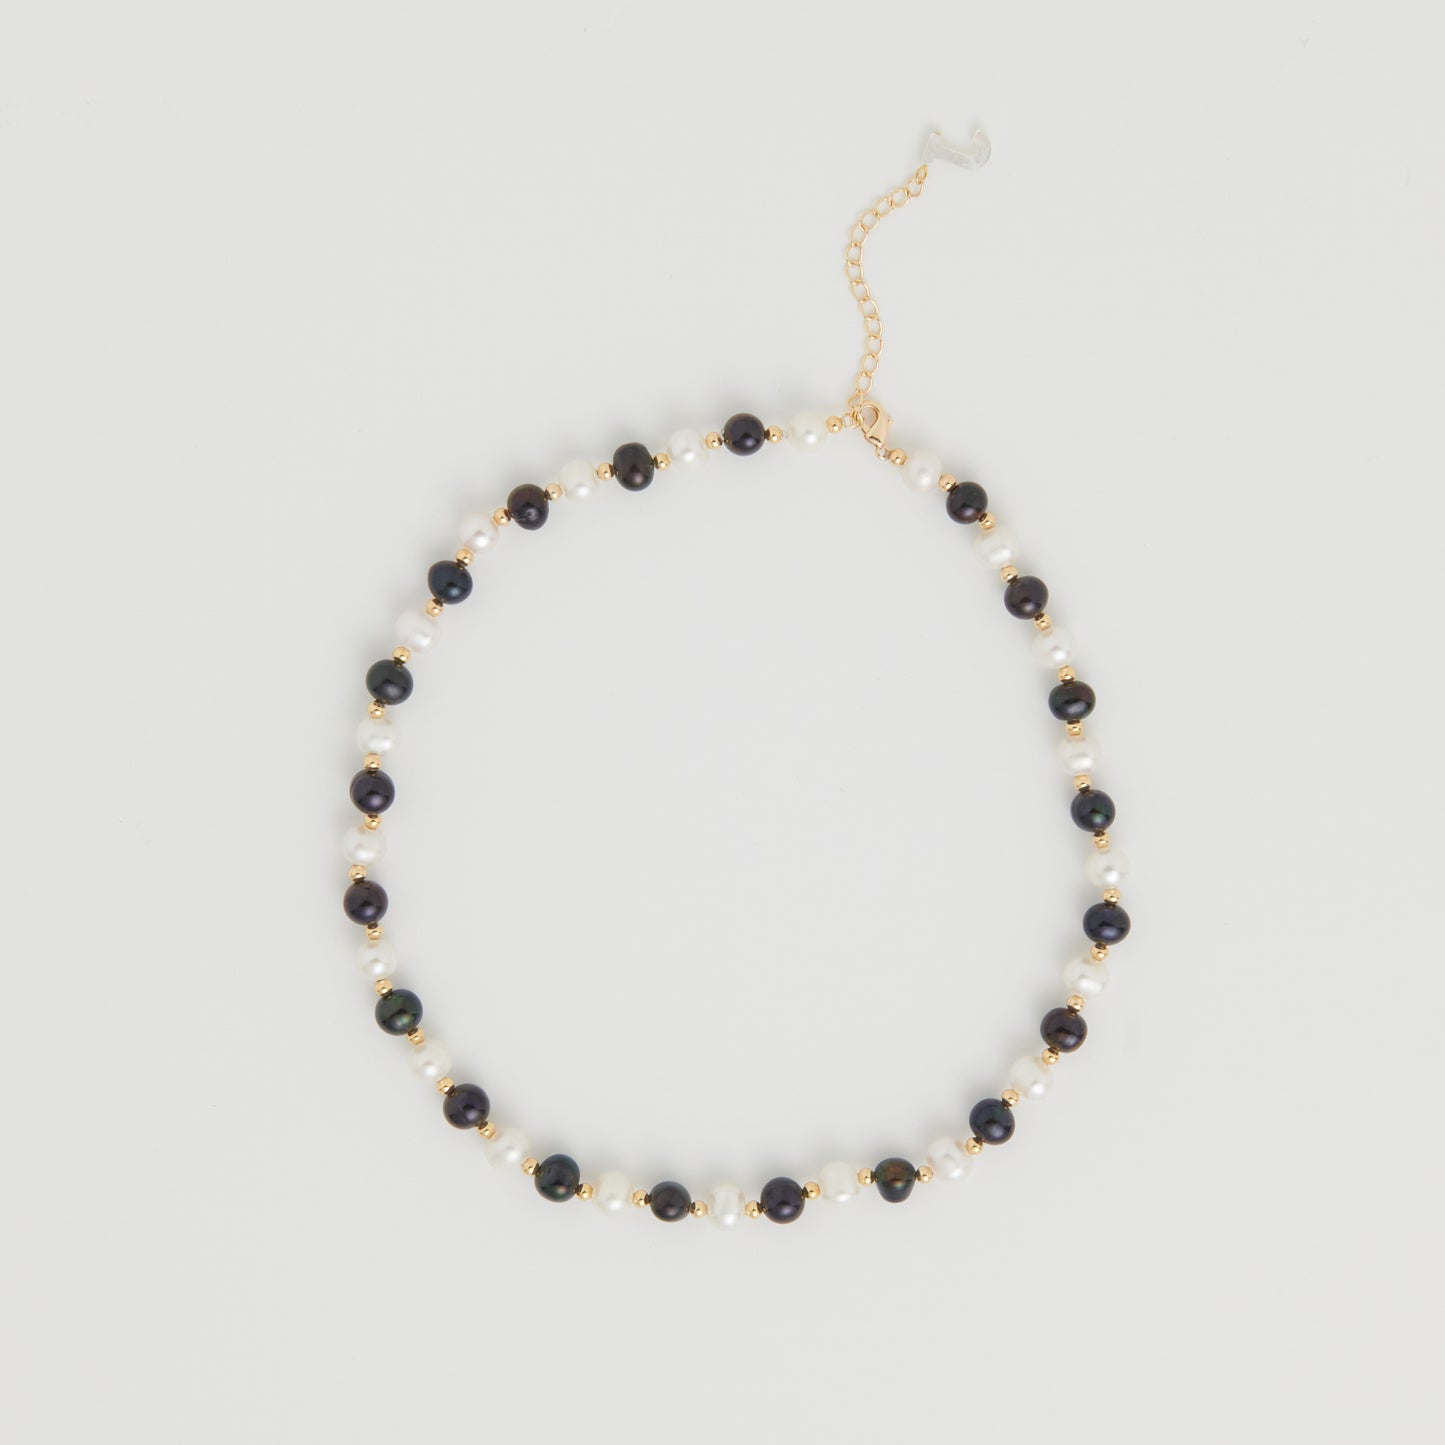 Item Image of Nectar Necklace from Juxtaposition Studio in Seoul Korea, Black and Ivory White Freshwater Pearl Necklace with 18k Gold Plating on Brass